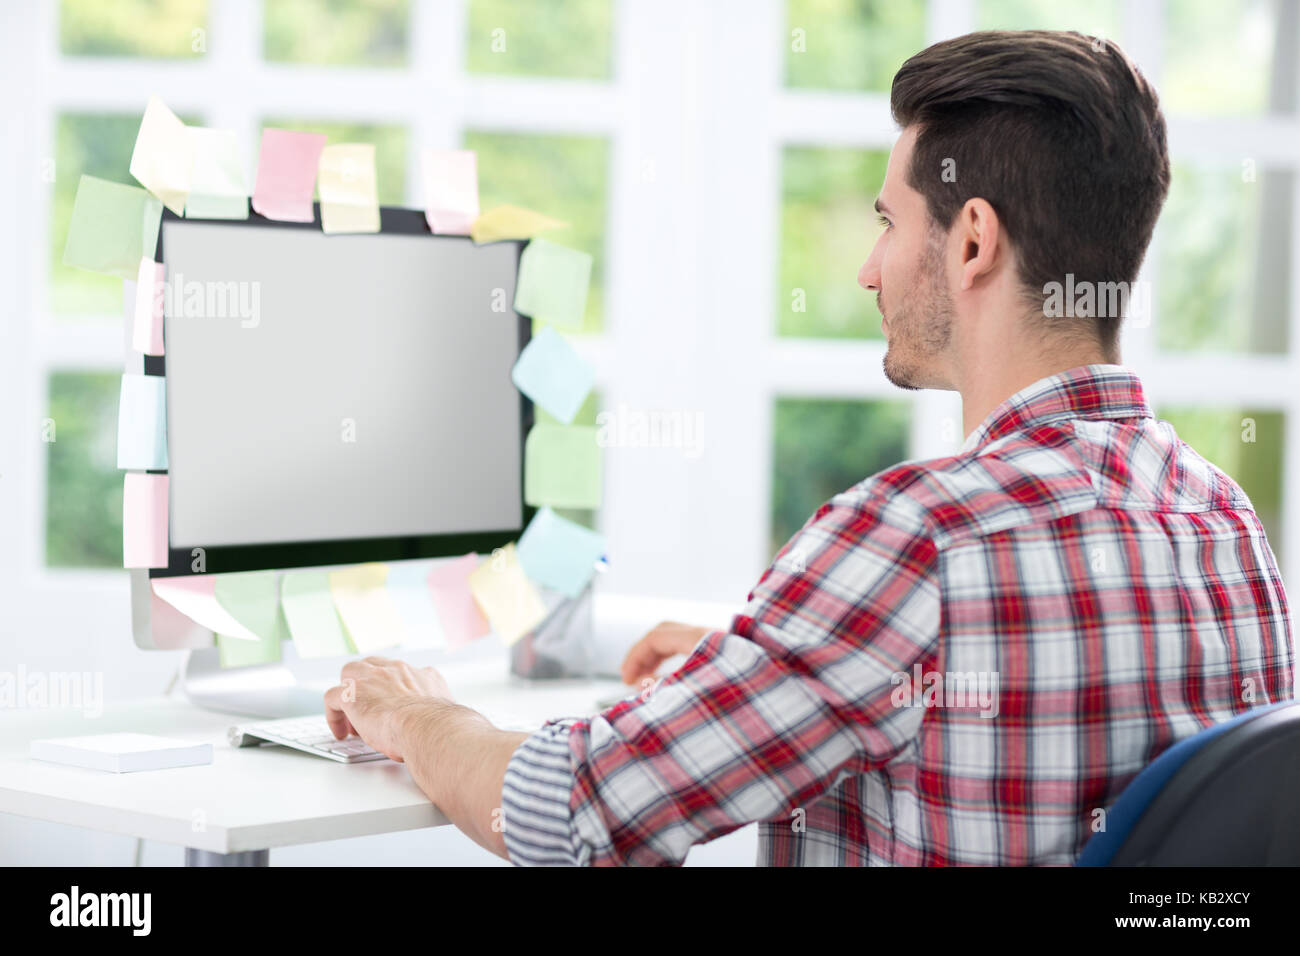 Man looking at a computer monitor with sticky note on it Stock Photo